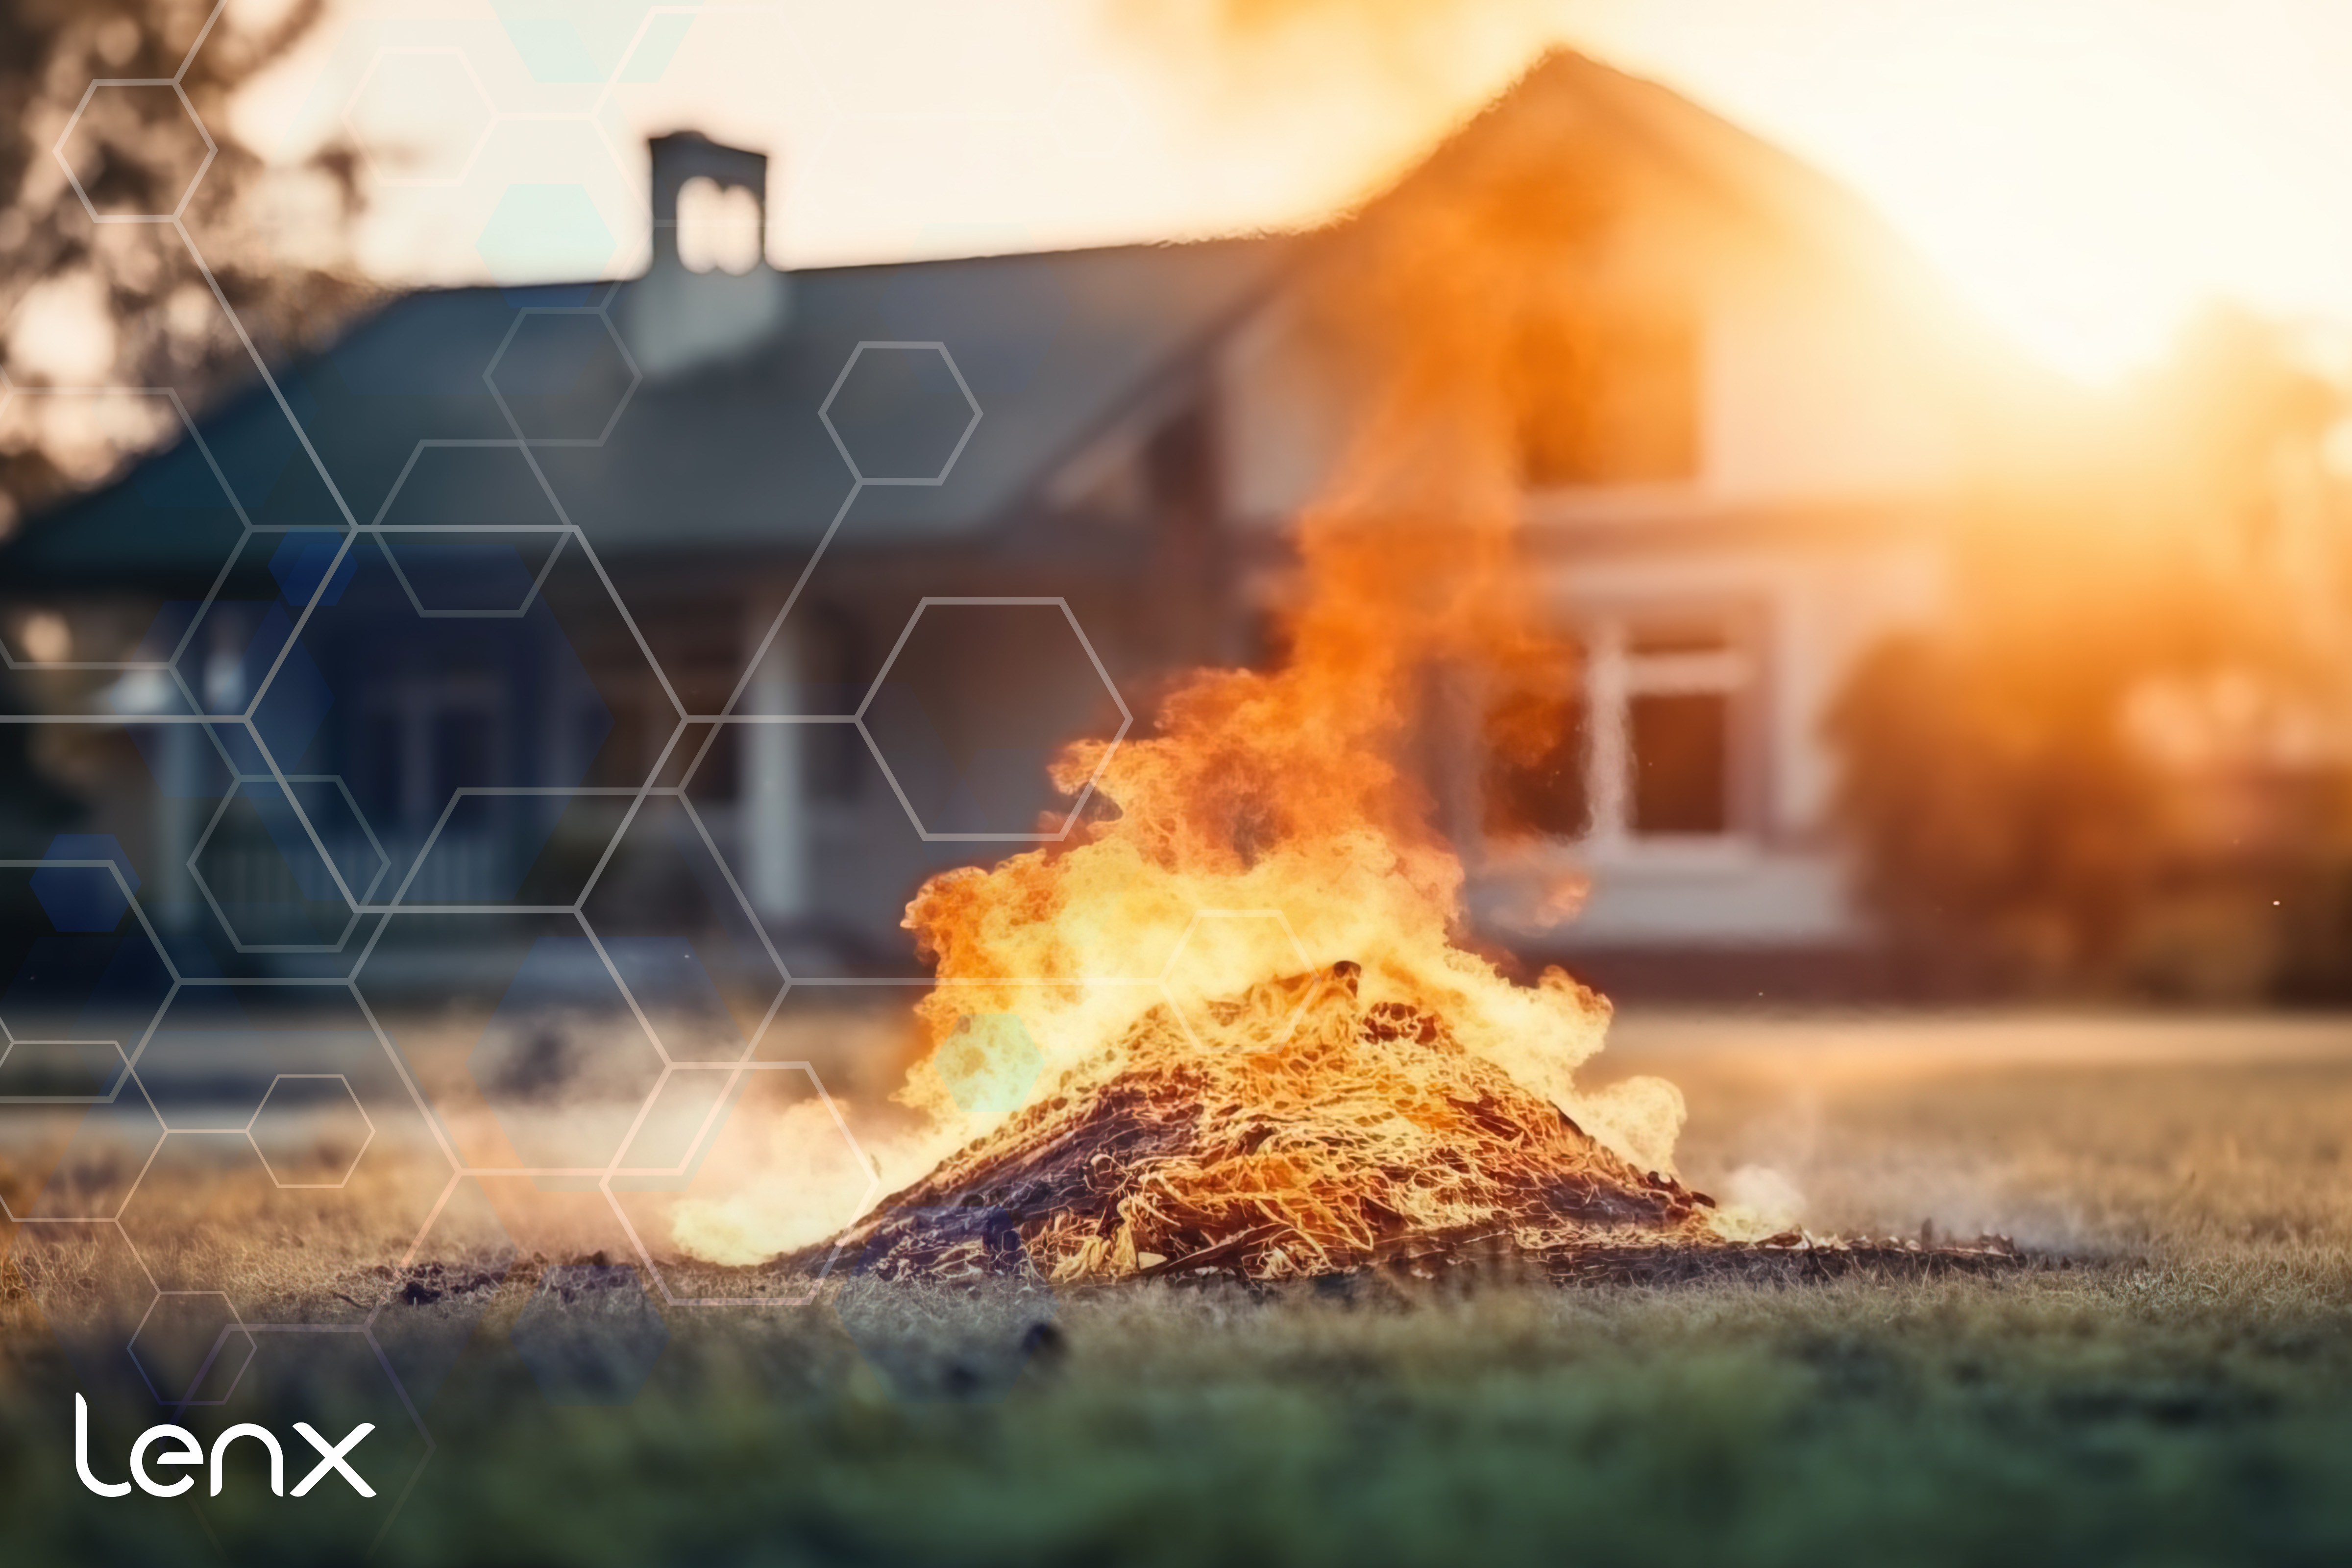 How AI Security, Active Shooter Detection Systems Can Protect Against Fires